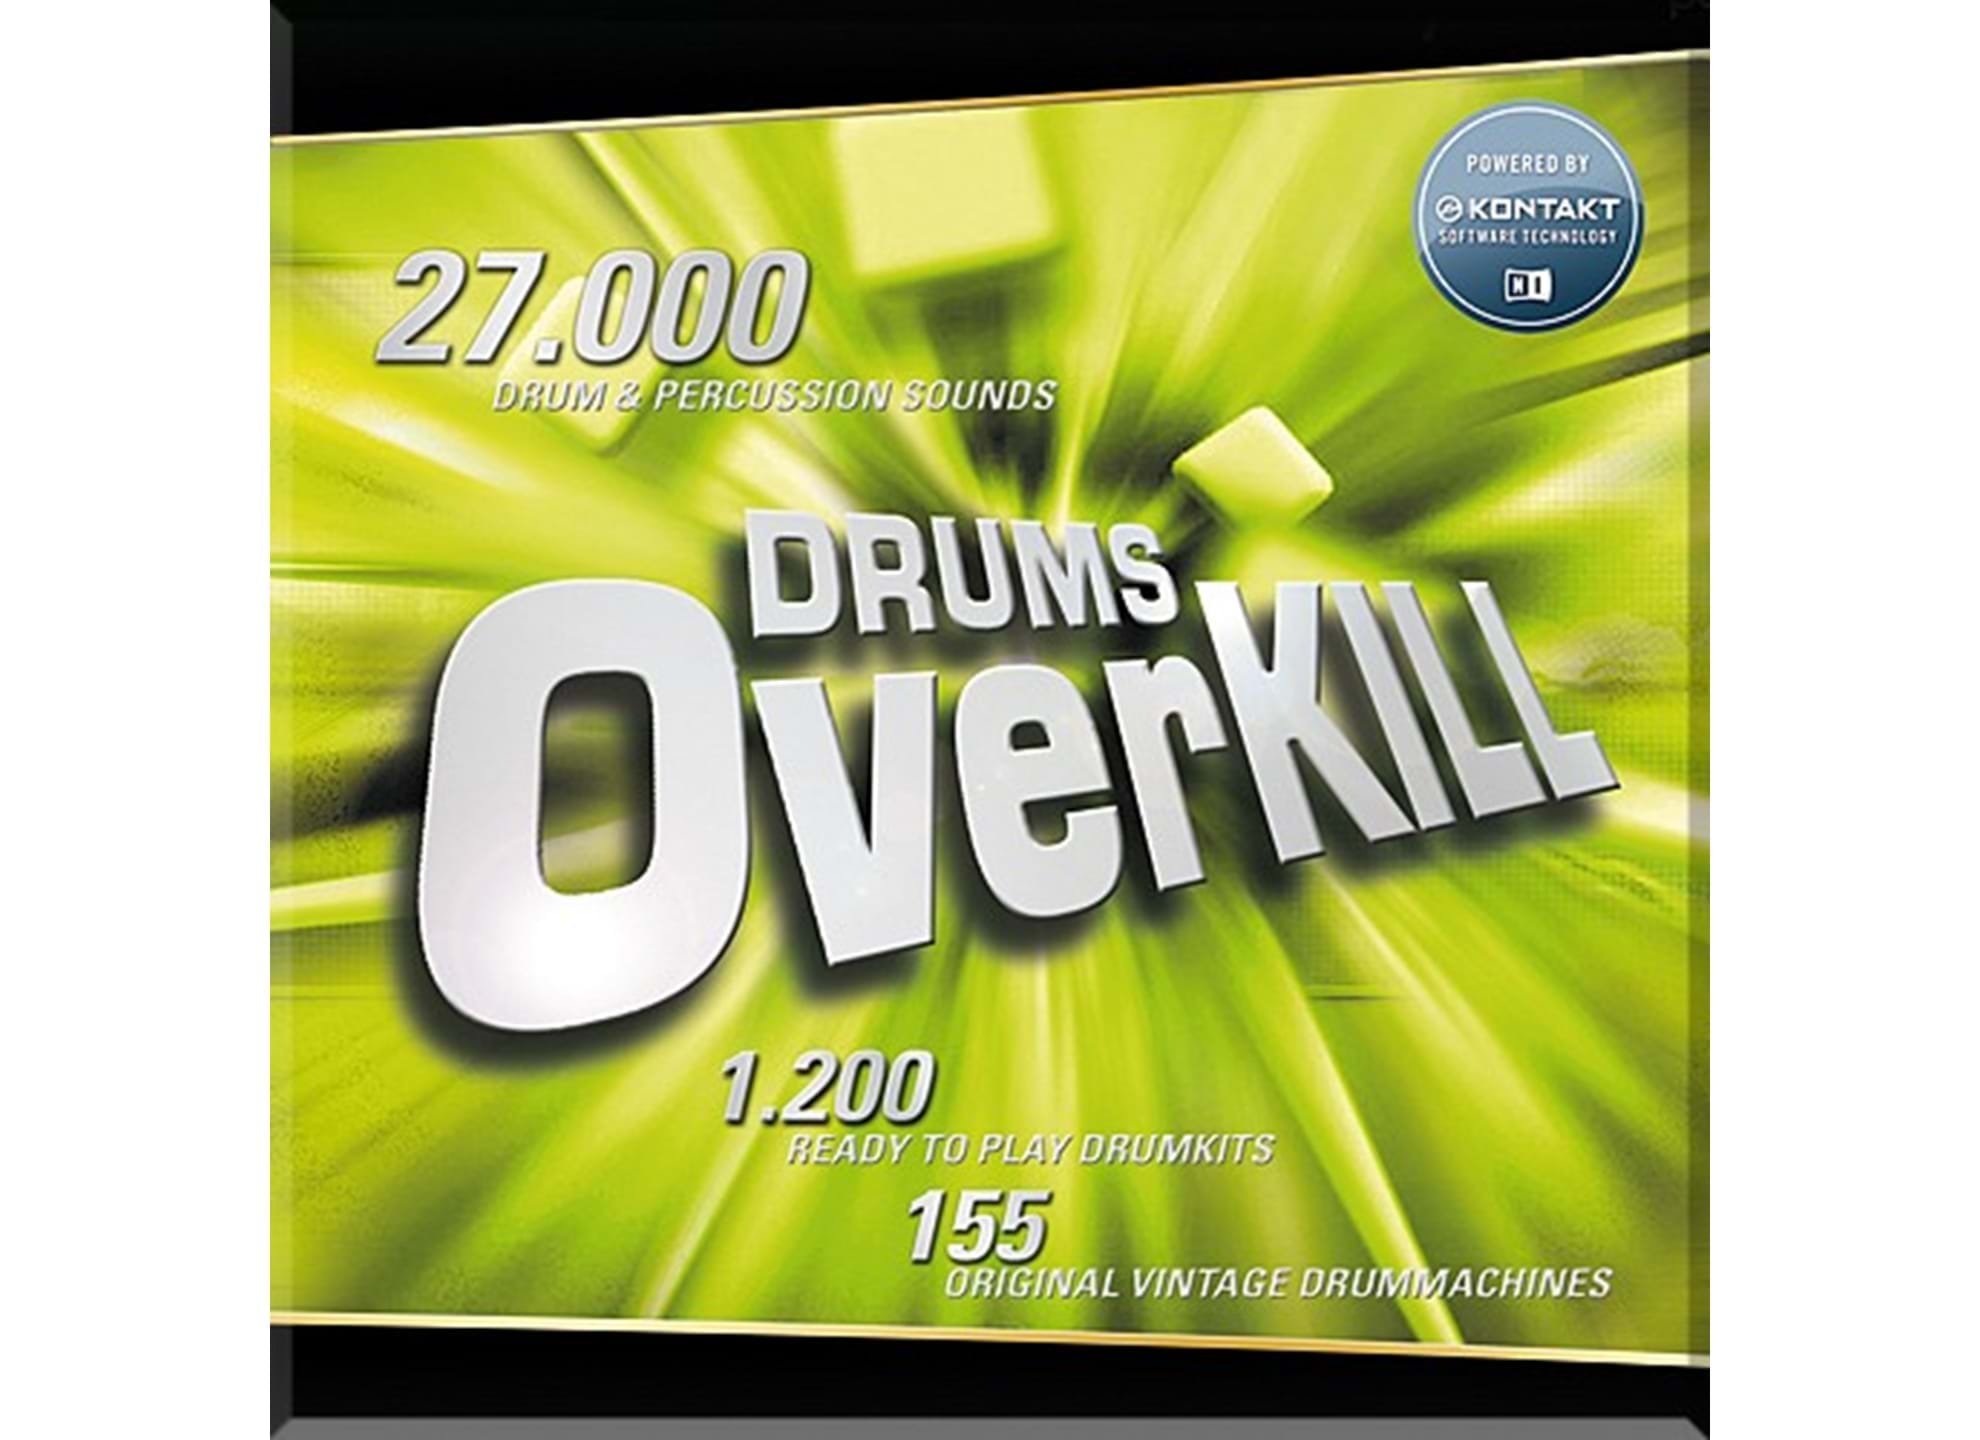 Drums Overkill